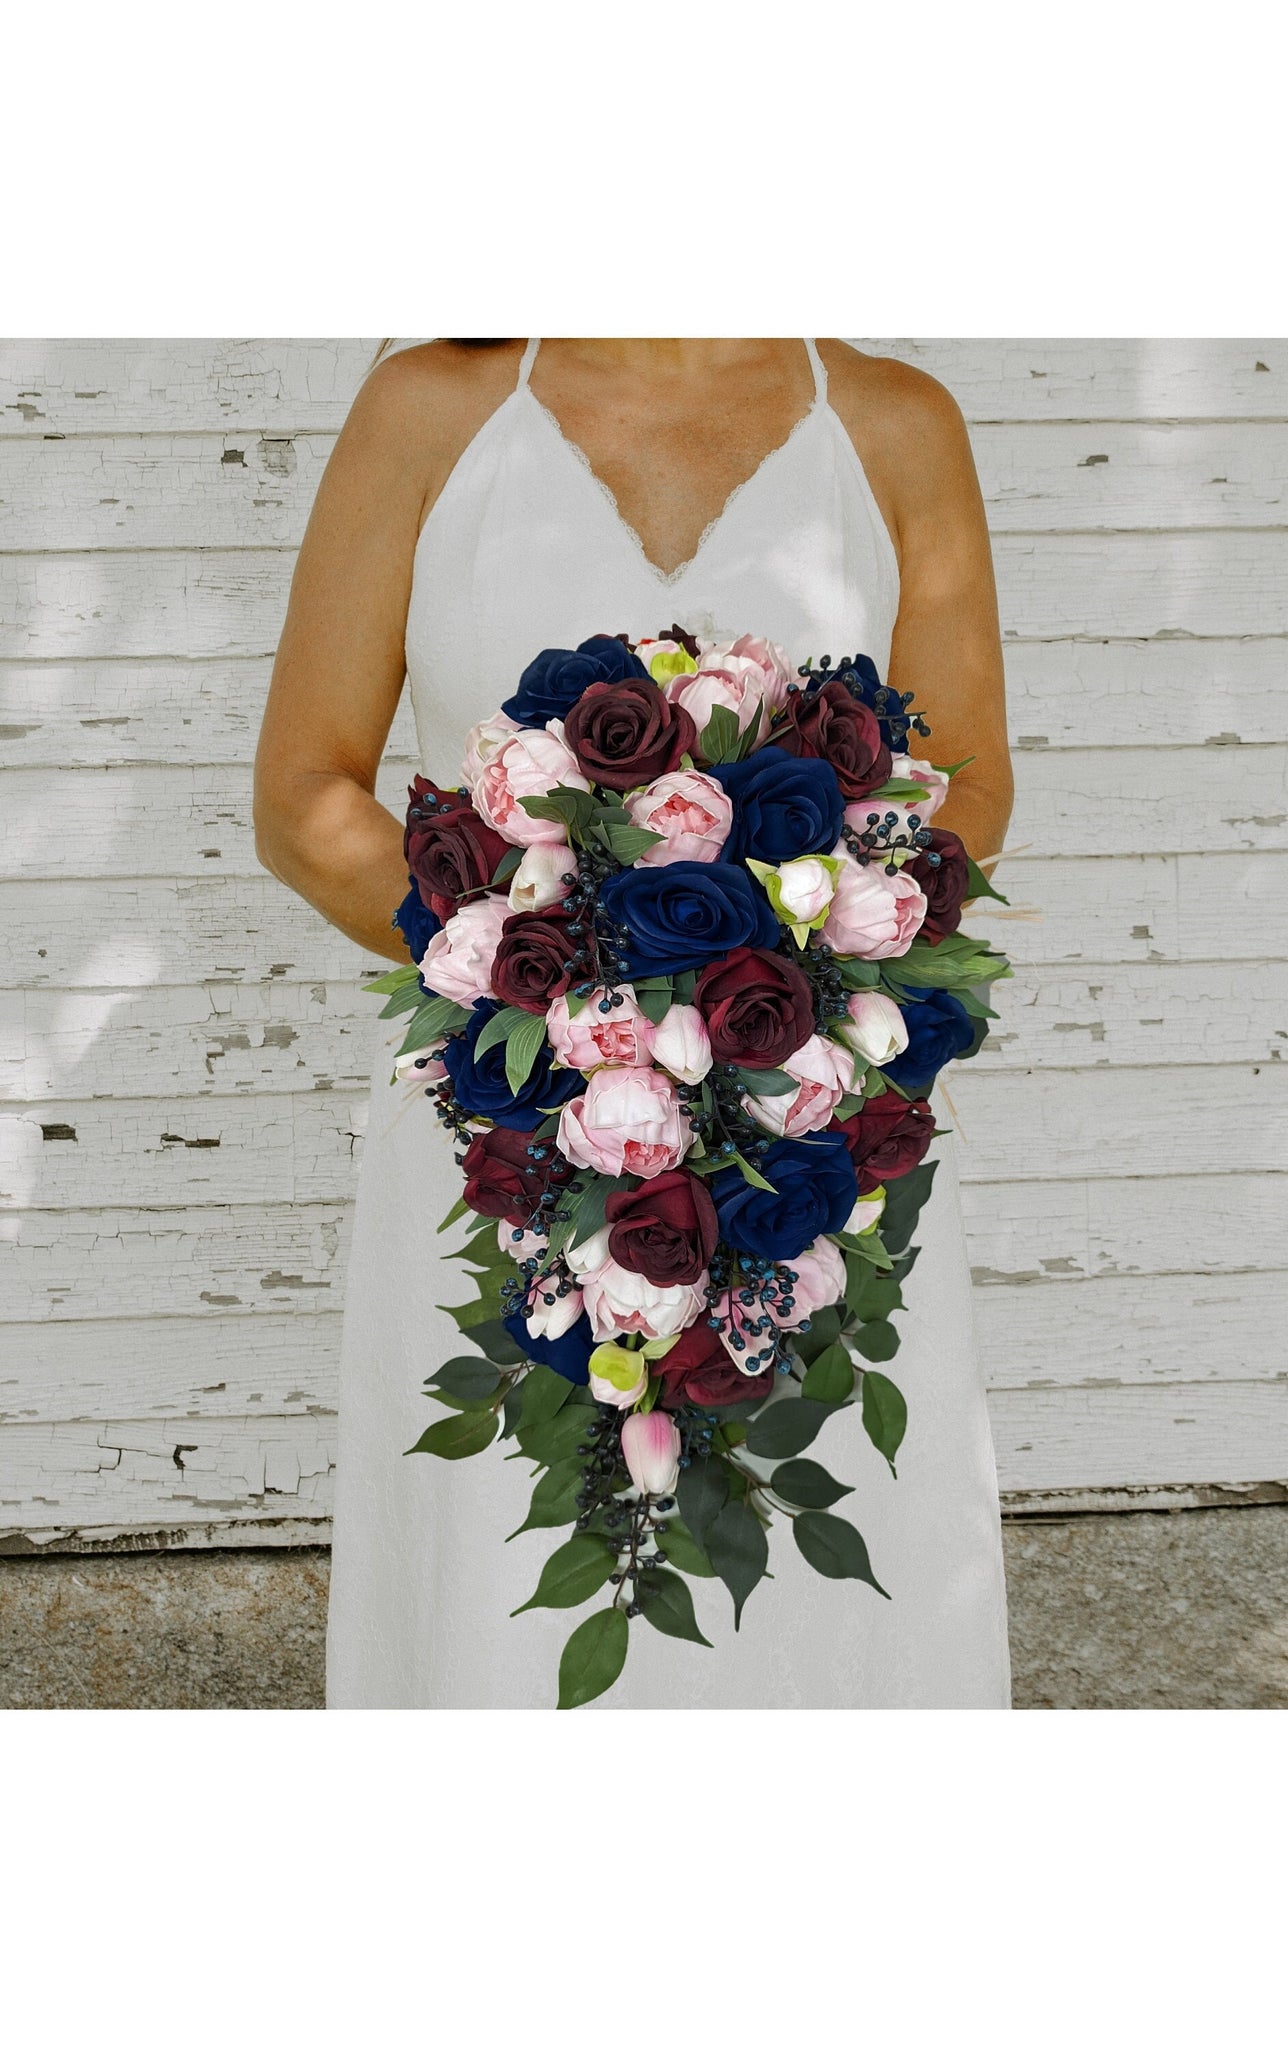 Berry Bright Wedding Bouquet, Colorful Dried Flower Bridal and Bridesmaid  Bouquet, Pink and Navy Floral Arrangement, Wedding Accessories 